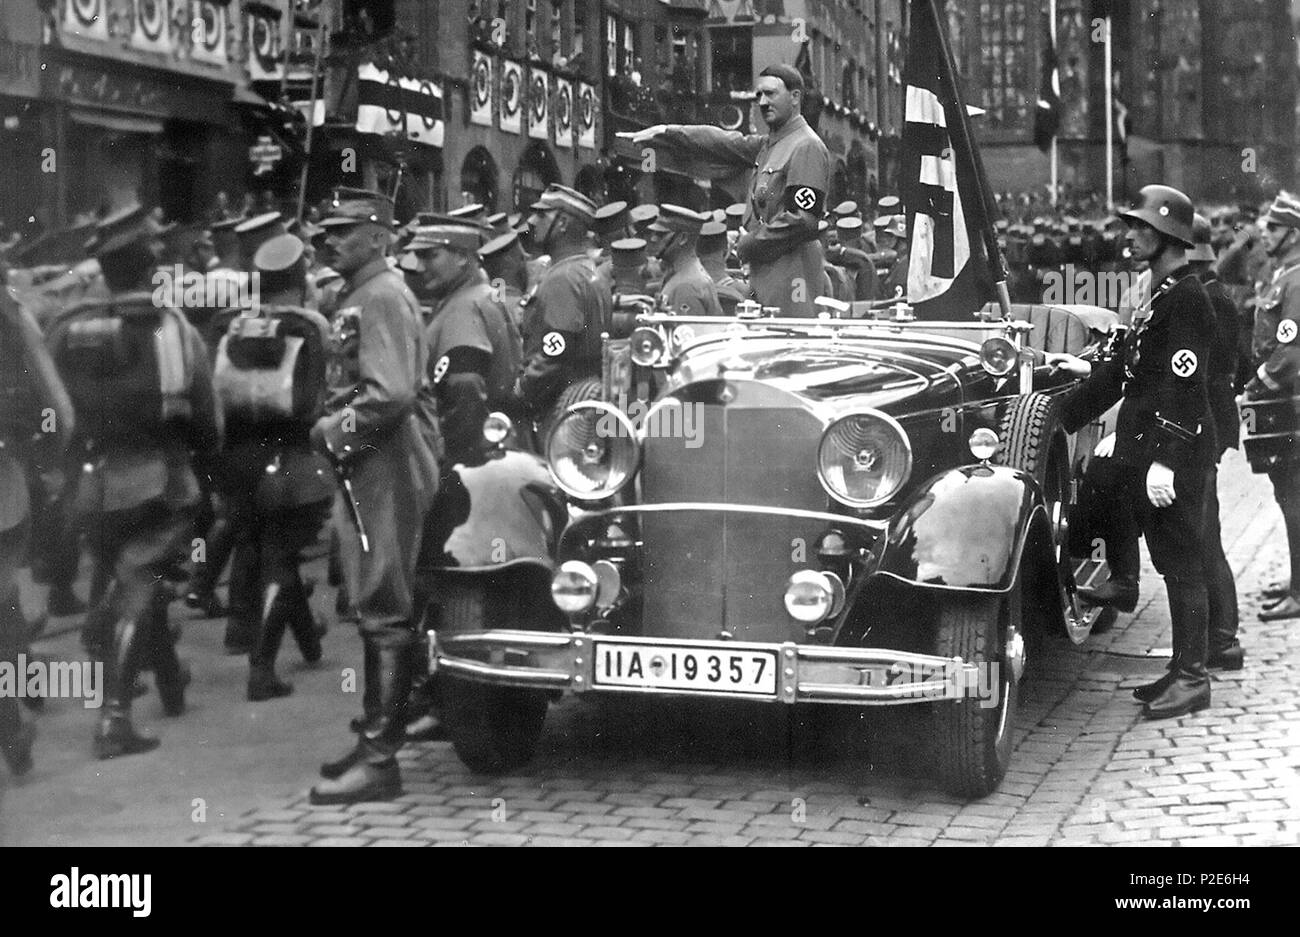 . English: Parade of SA troops past Hitler, Nuremberg 1935. In the car with Hitler: the Blutfahne, behind the car: SS-man en:Jakob Grimminger the carrier of the Blutfahne flag. From the Reichsparteitag der NSDAP 10th-16th September 1935 (see also File:Bundesarchiv Bild 183-1982-0809-502, Nürnberg, Reichsparteitag, SA-Marsch.jpg Deutsch: Nürnberg, eine Parade der SA marschieren an Hitler vorbei. Im Auto hinter Hitler: Die de:Blutfahne (NSDAP), rechts daneben der SS-Mann de:Jakob Grimminger, der Träger der Blutfahne war . September 1935. Charles Russell Collection, NARA. 45 Reichsparteitagnov193 Stock Photo